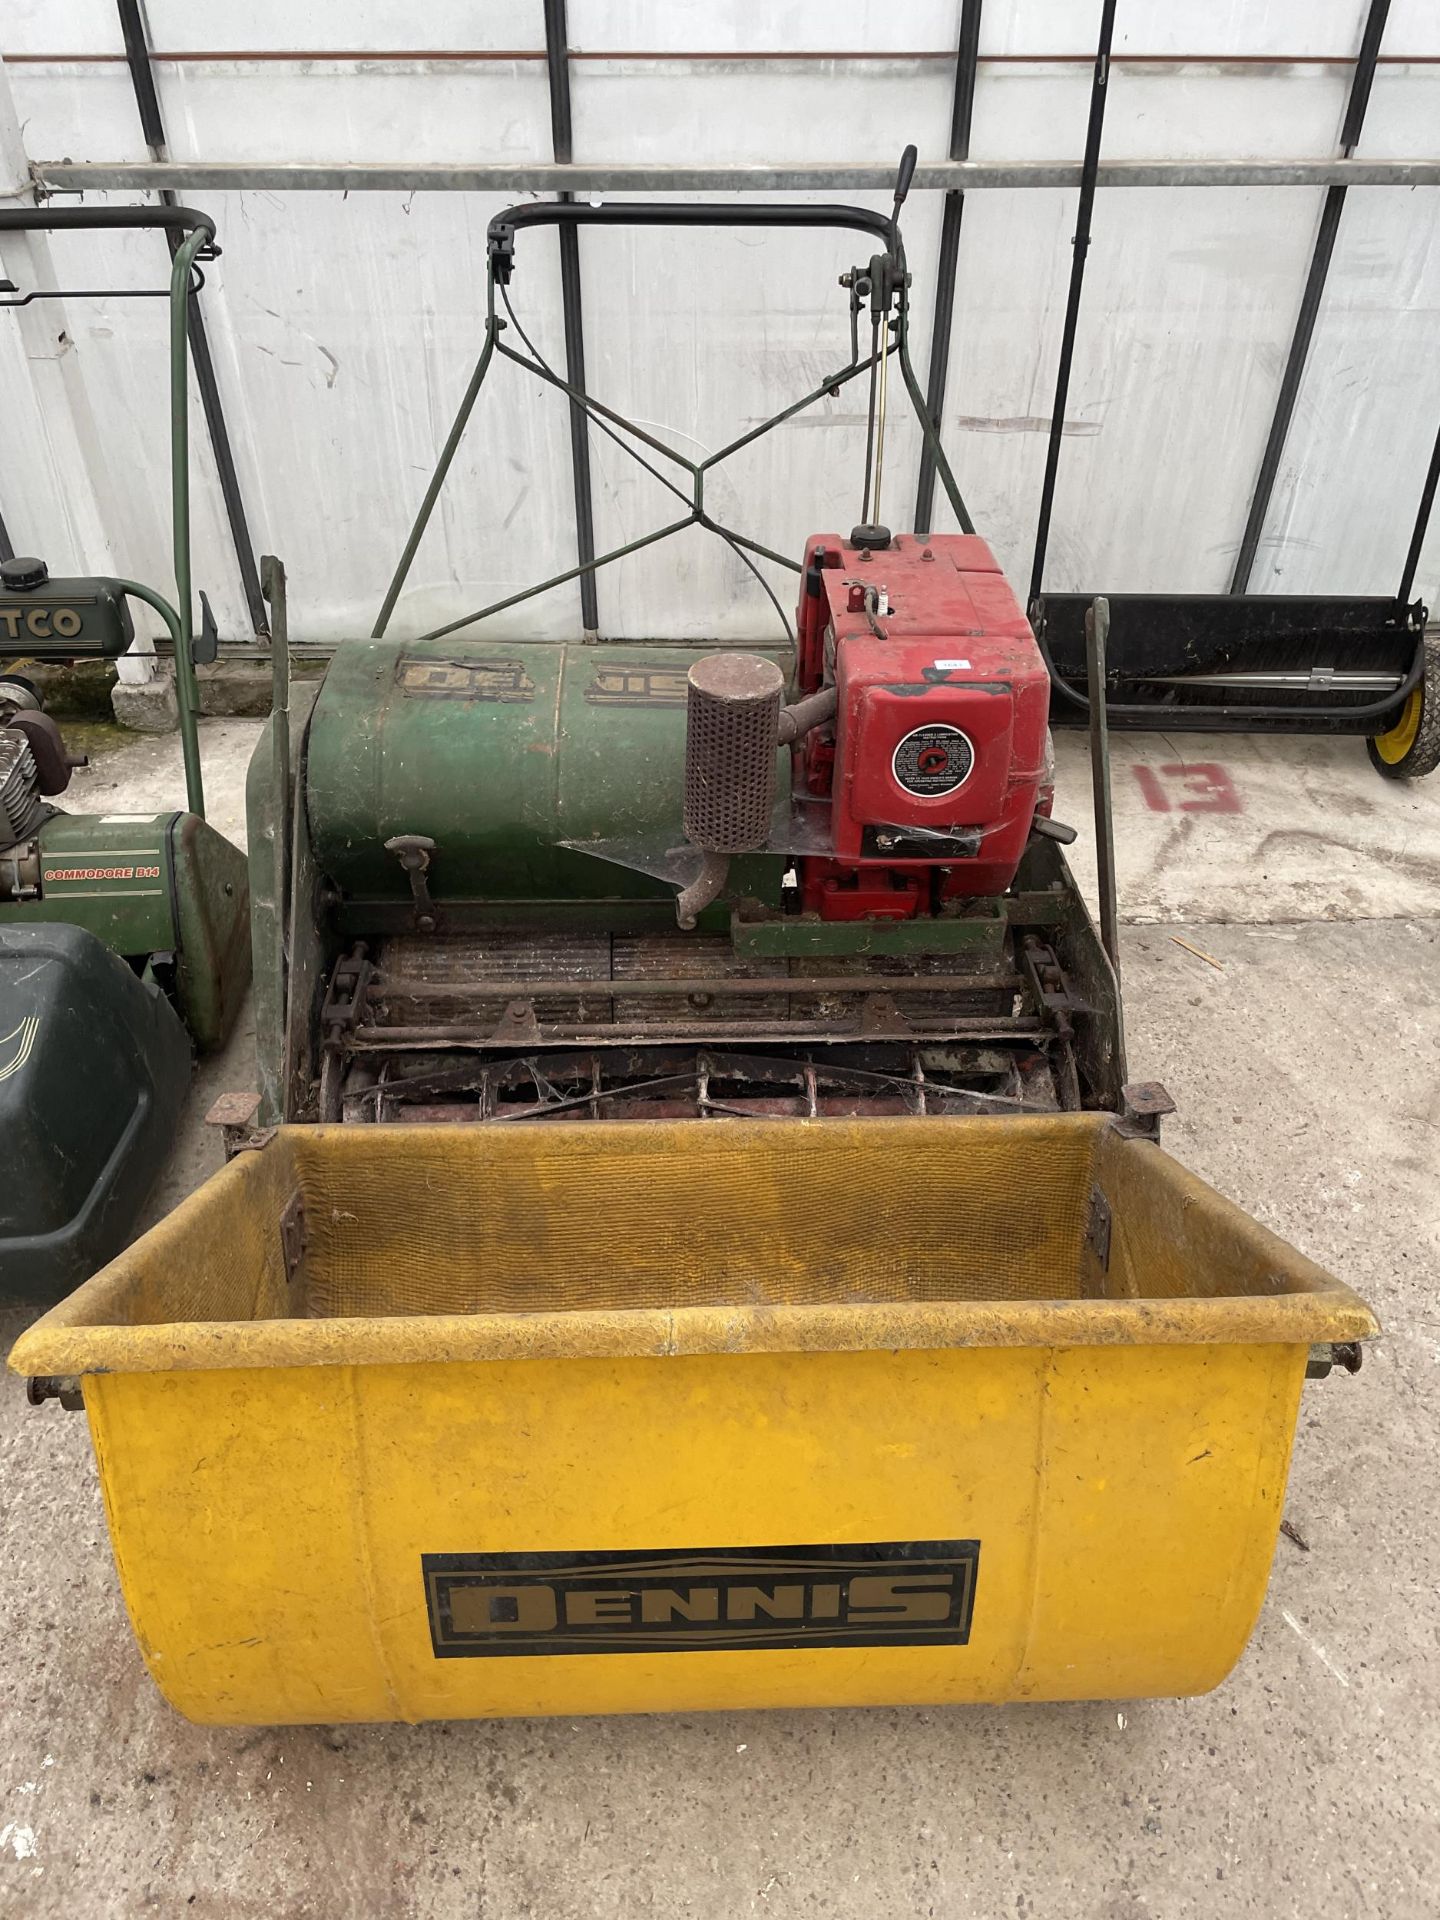 A LARGE DENNIS CYLINDER MOWER WITH GRASS BOX